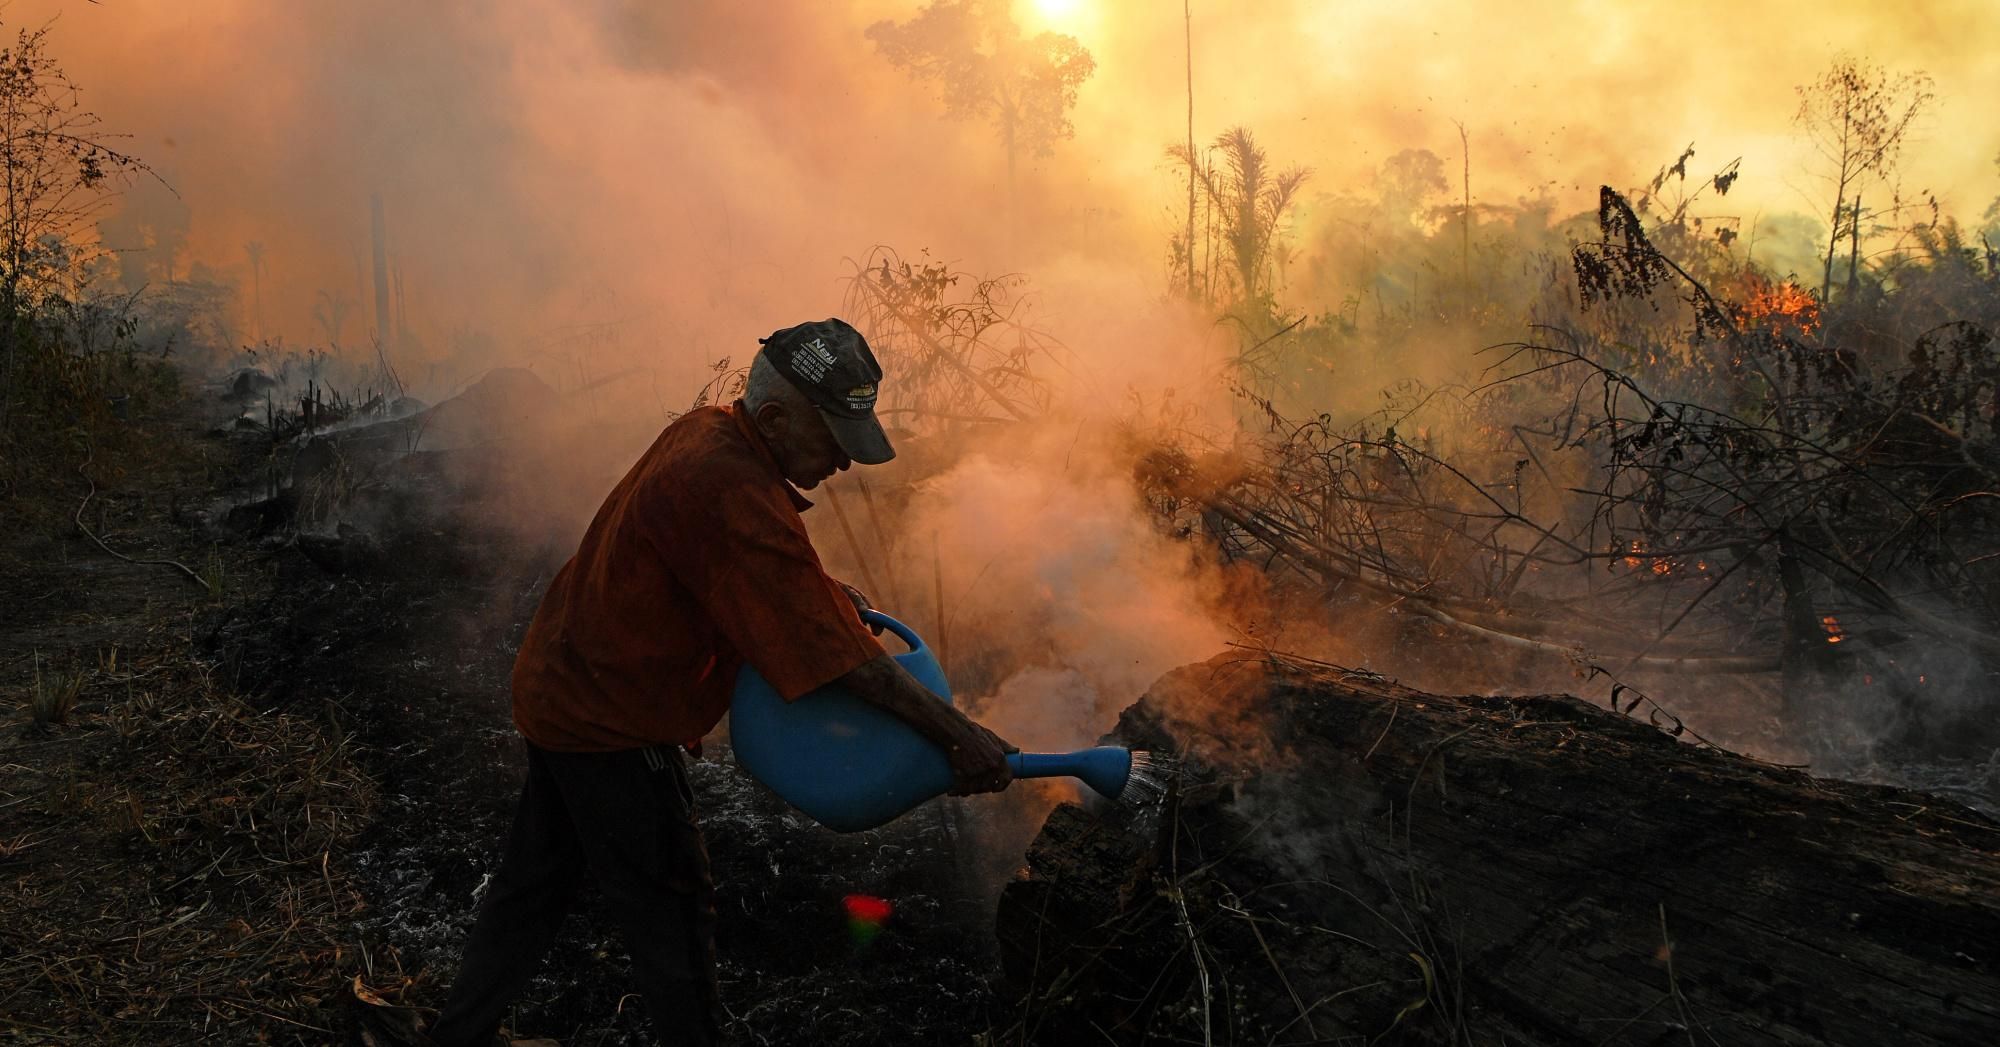 A farmer tries to pour water on an area close to an illegally lit fire in the Amazon rainforest, south of Novo Progresso in the Brazilian state of Pará on August 15, 2020. (Photo: Carl de Souza/AFP via Getty Images)